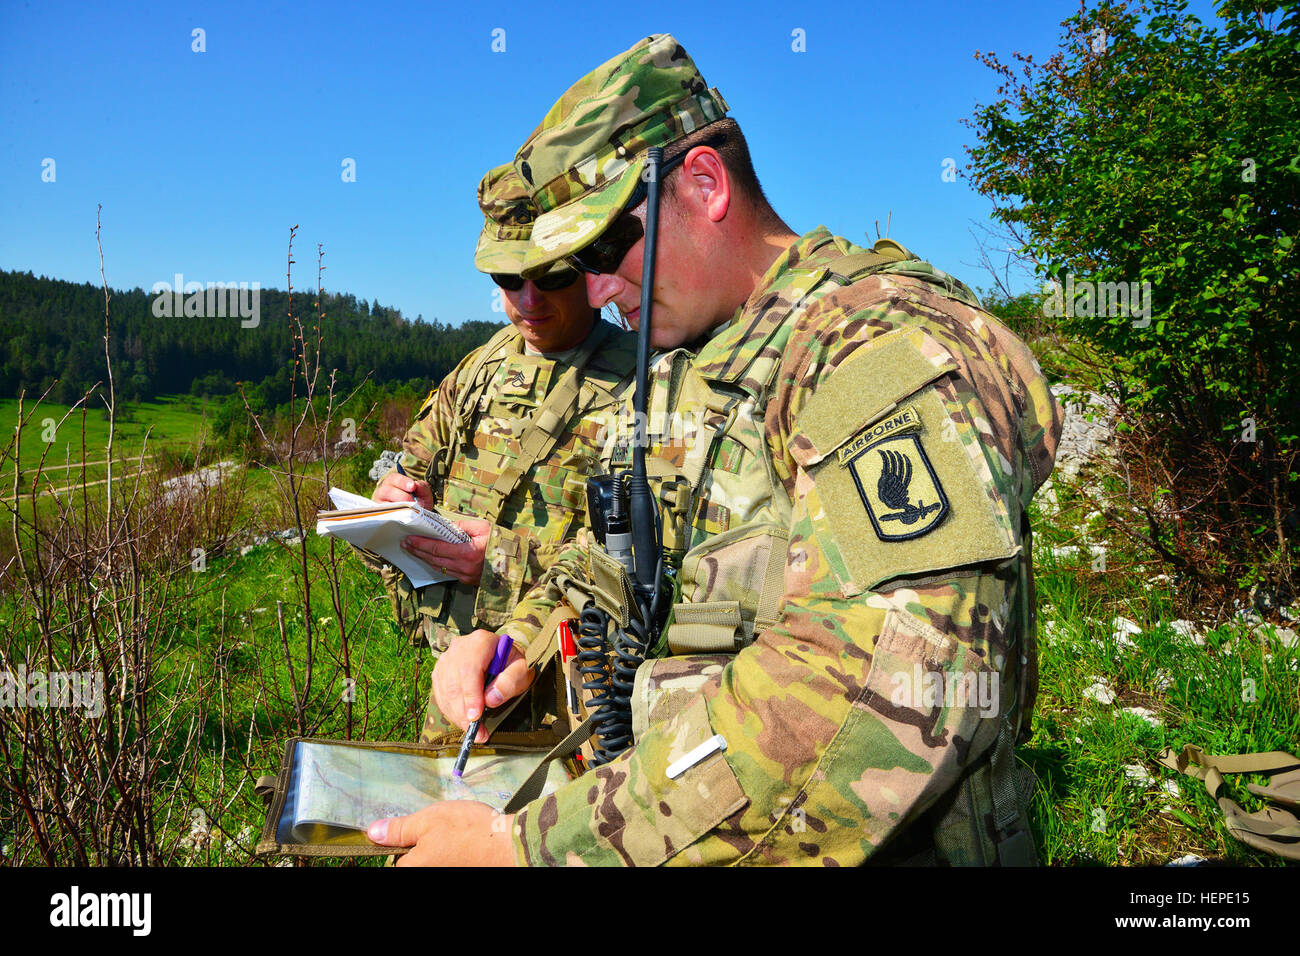 Spc. Brock Higgins (right), a paratrooper assigned to the 1st Battalion, 503rd Infantry Regiment, 173rd Airborne Brigade, plots a target on a map while Staff Sgt. Brian Finger (left), a paratrooper assigned to the 2nd Battalion, 503rd Infantry Regiment, 173rd Airborne Brigade, records data to call for fire during the Adriatic Strike exercise June 3, 2015 at Pocek Range in Postonja, Slovenia. This training gives U.S. joint terminal attack controllers the chance to work directly with the militaries of other partner nations. The exercise brought together NATO allies from the U.S. and Slovenian mi Stock Photo